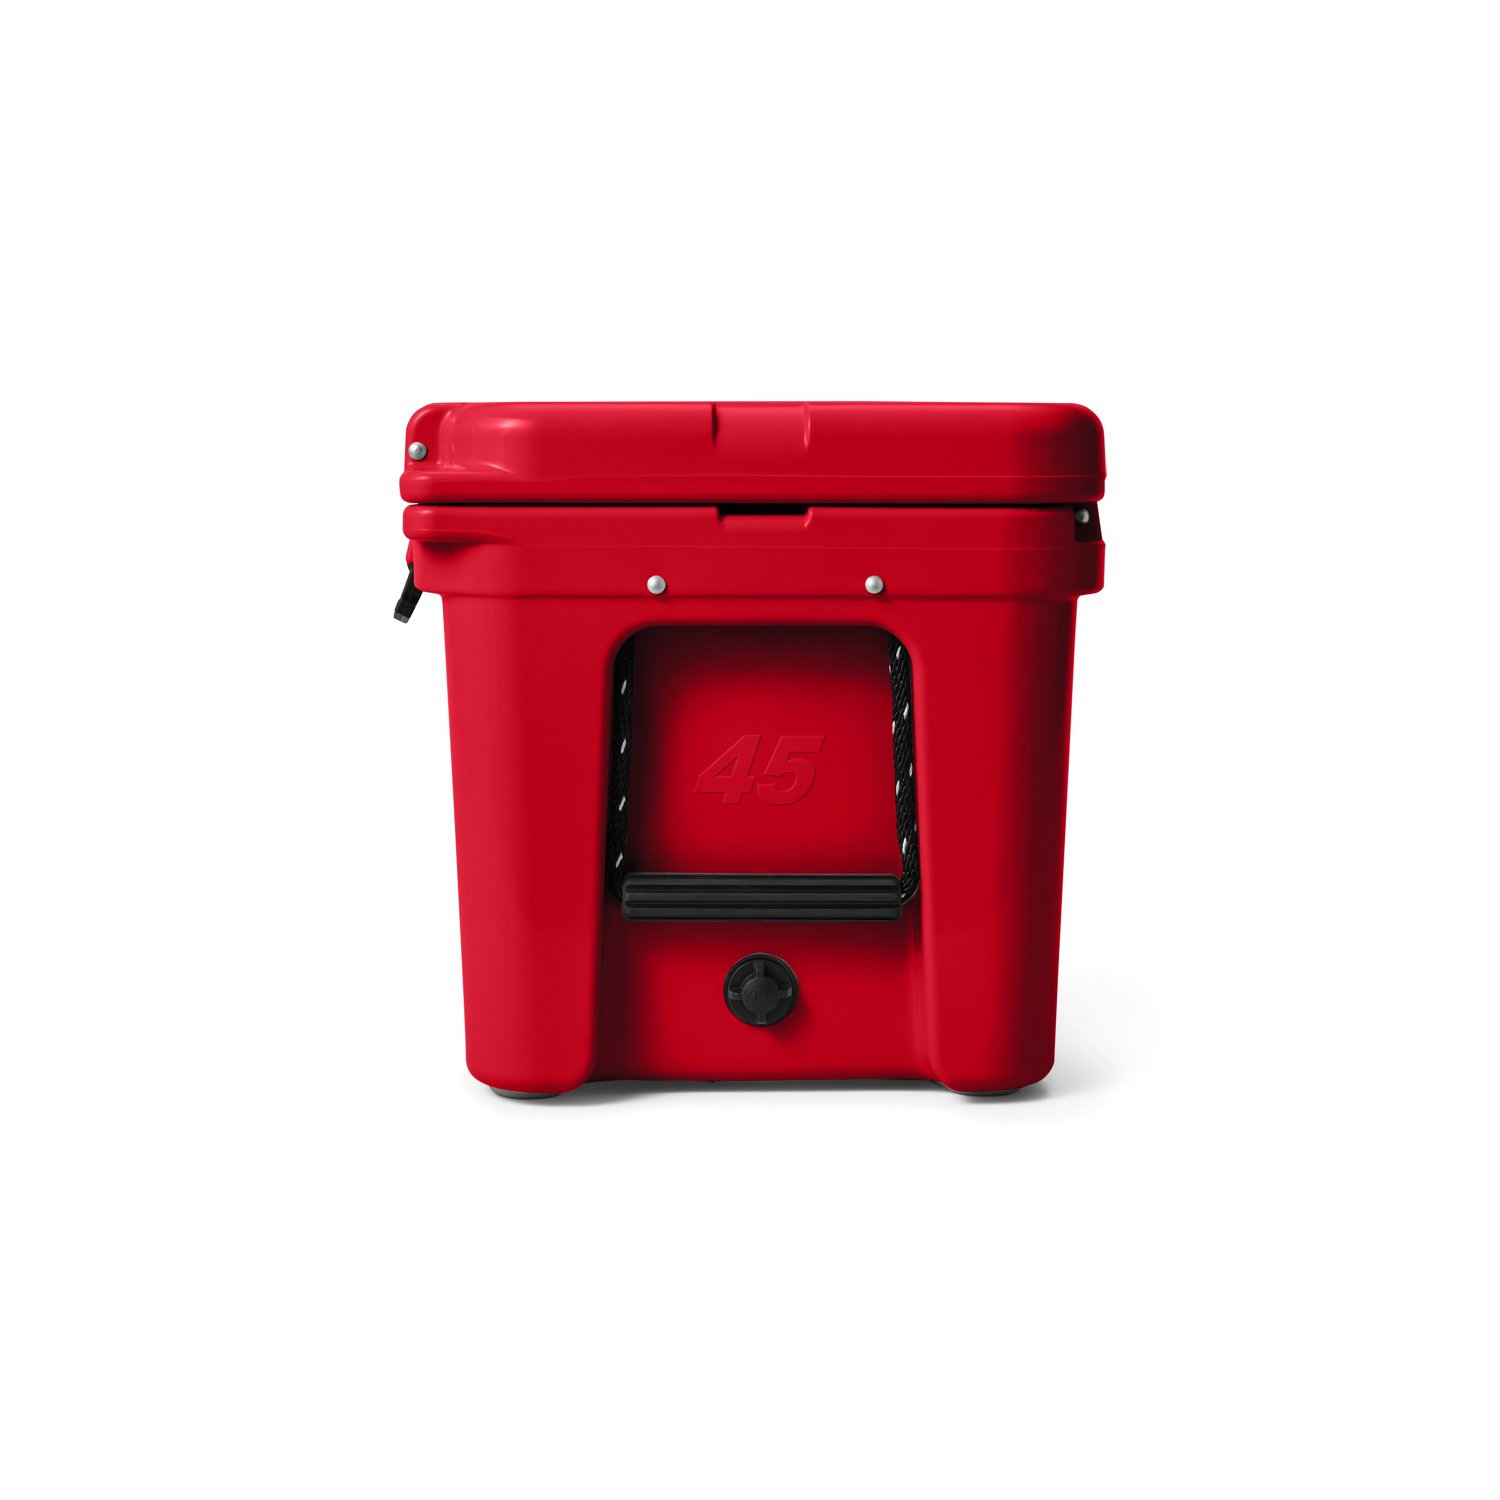 https://academy.scene7.com/is/image/academy//coolers/yeti-tundra-45-cooler-10045350000-red/184494c6142845f2abe0f27c0417aadb?$pdp-mobile-gallery-ng$